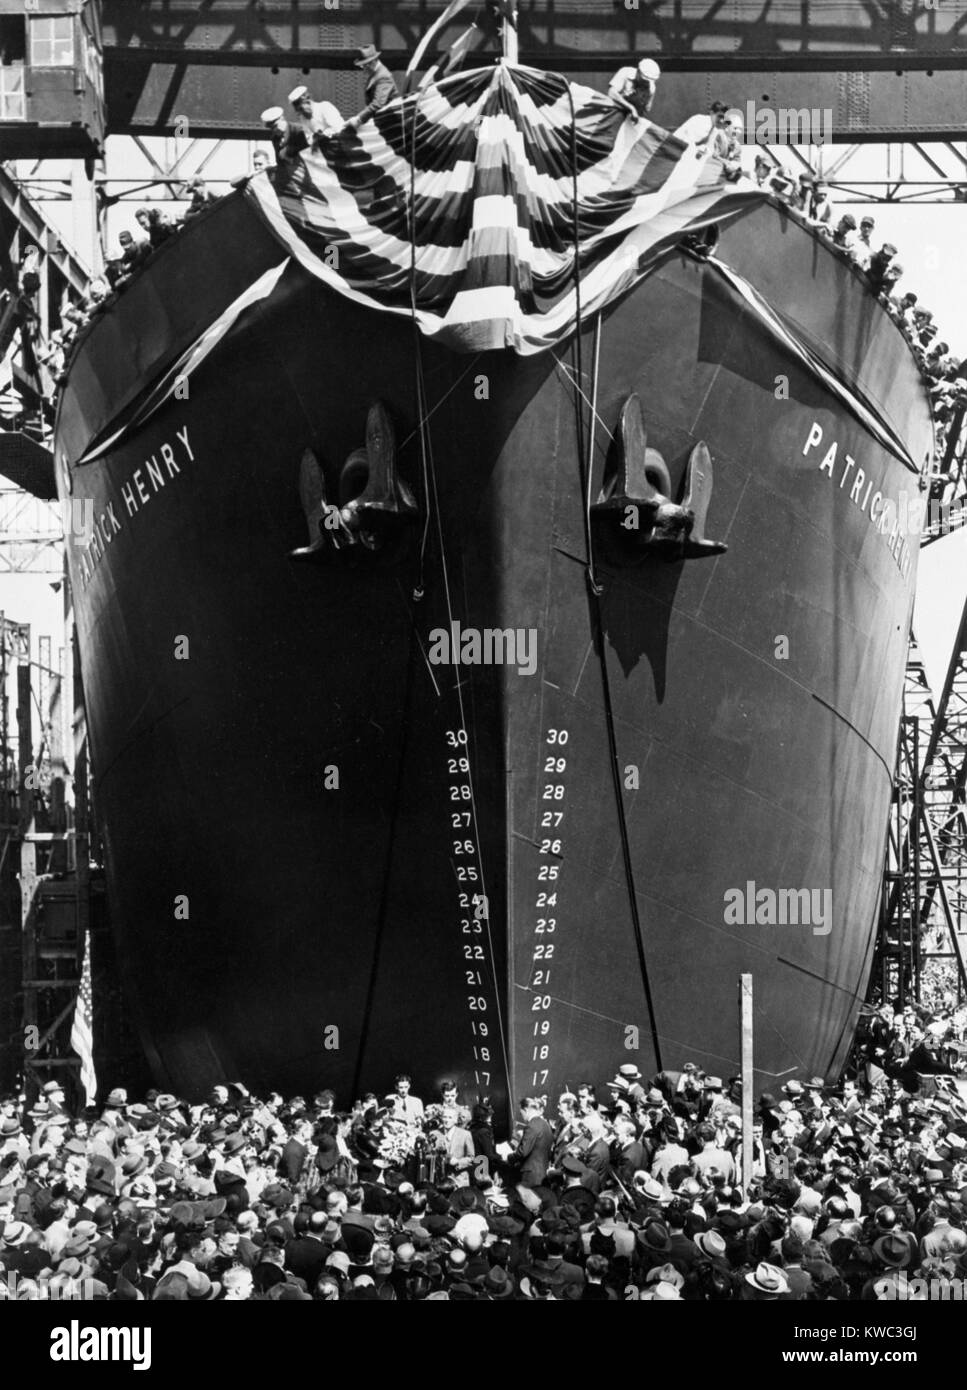 SS Patrick Henry was the first Liberty Ship launched on Sept. 27, 1941. During World War 2 she made 12 voyages to ports including Murmansk, Trinidad, Cape Town, Naples, and Dakar. Bethlehem-Fairfield Shipyard in Baltimore, Maryland. (BSLOC 2015 13 98) Stock Photo